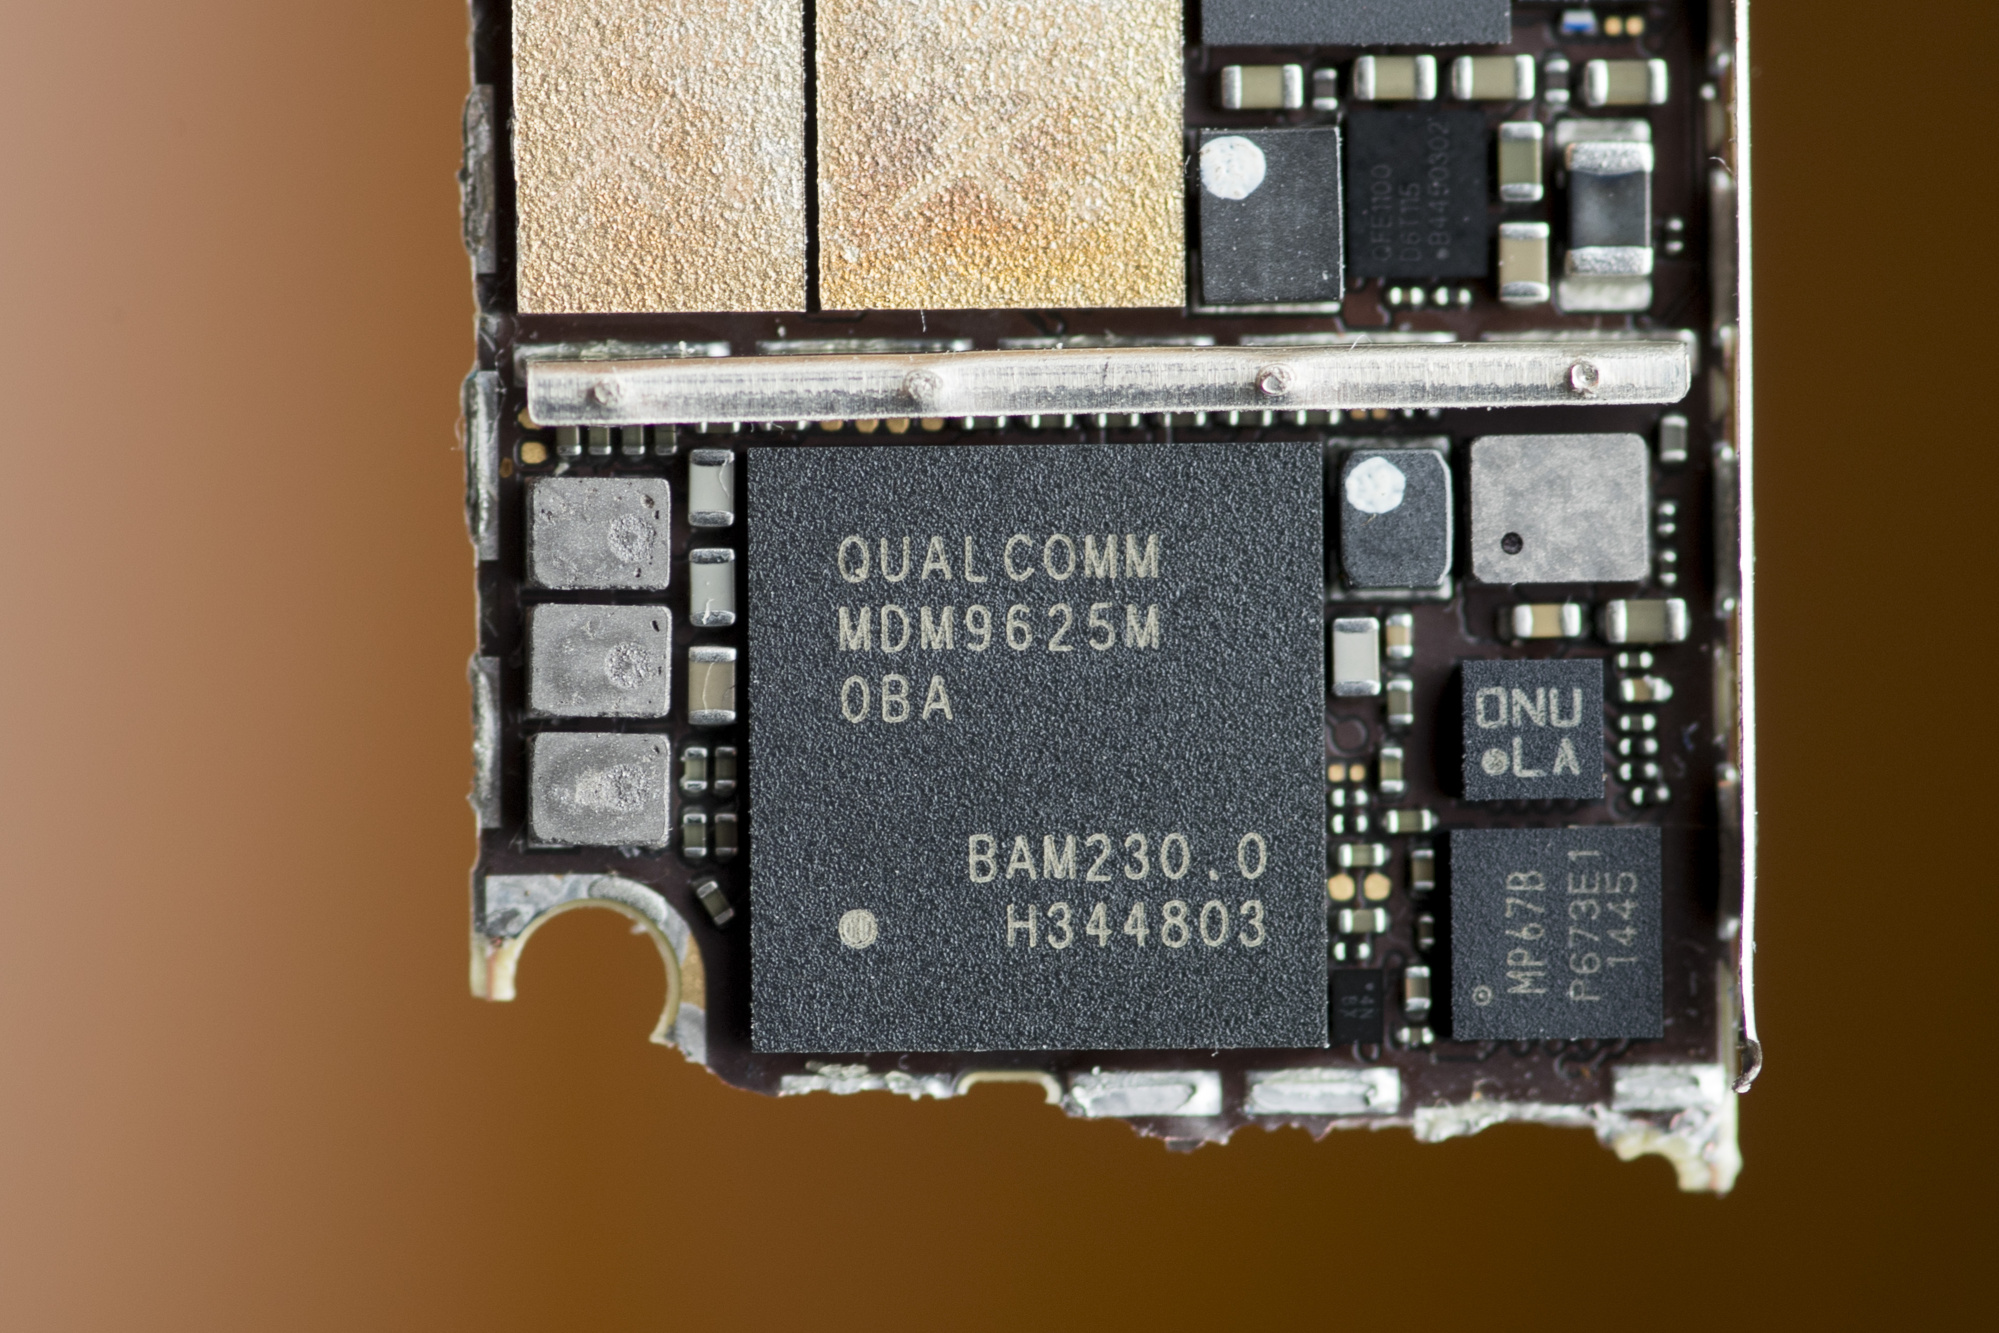 A Qualcomm Inc. baseband modem integrated circuit (IC) chip, bottom, of an Apple Inc. iPhone 6 smartphone is seen in an arranged photograph.